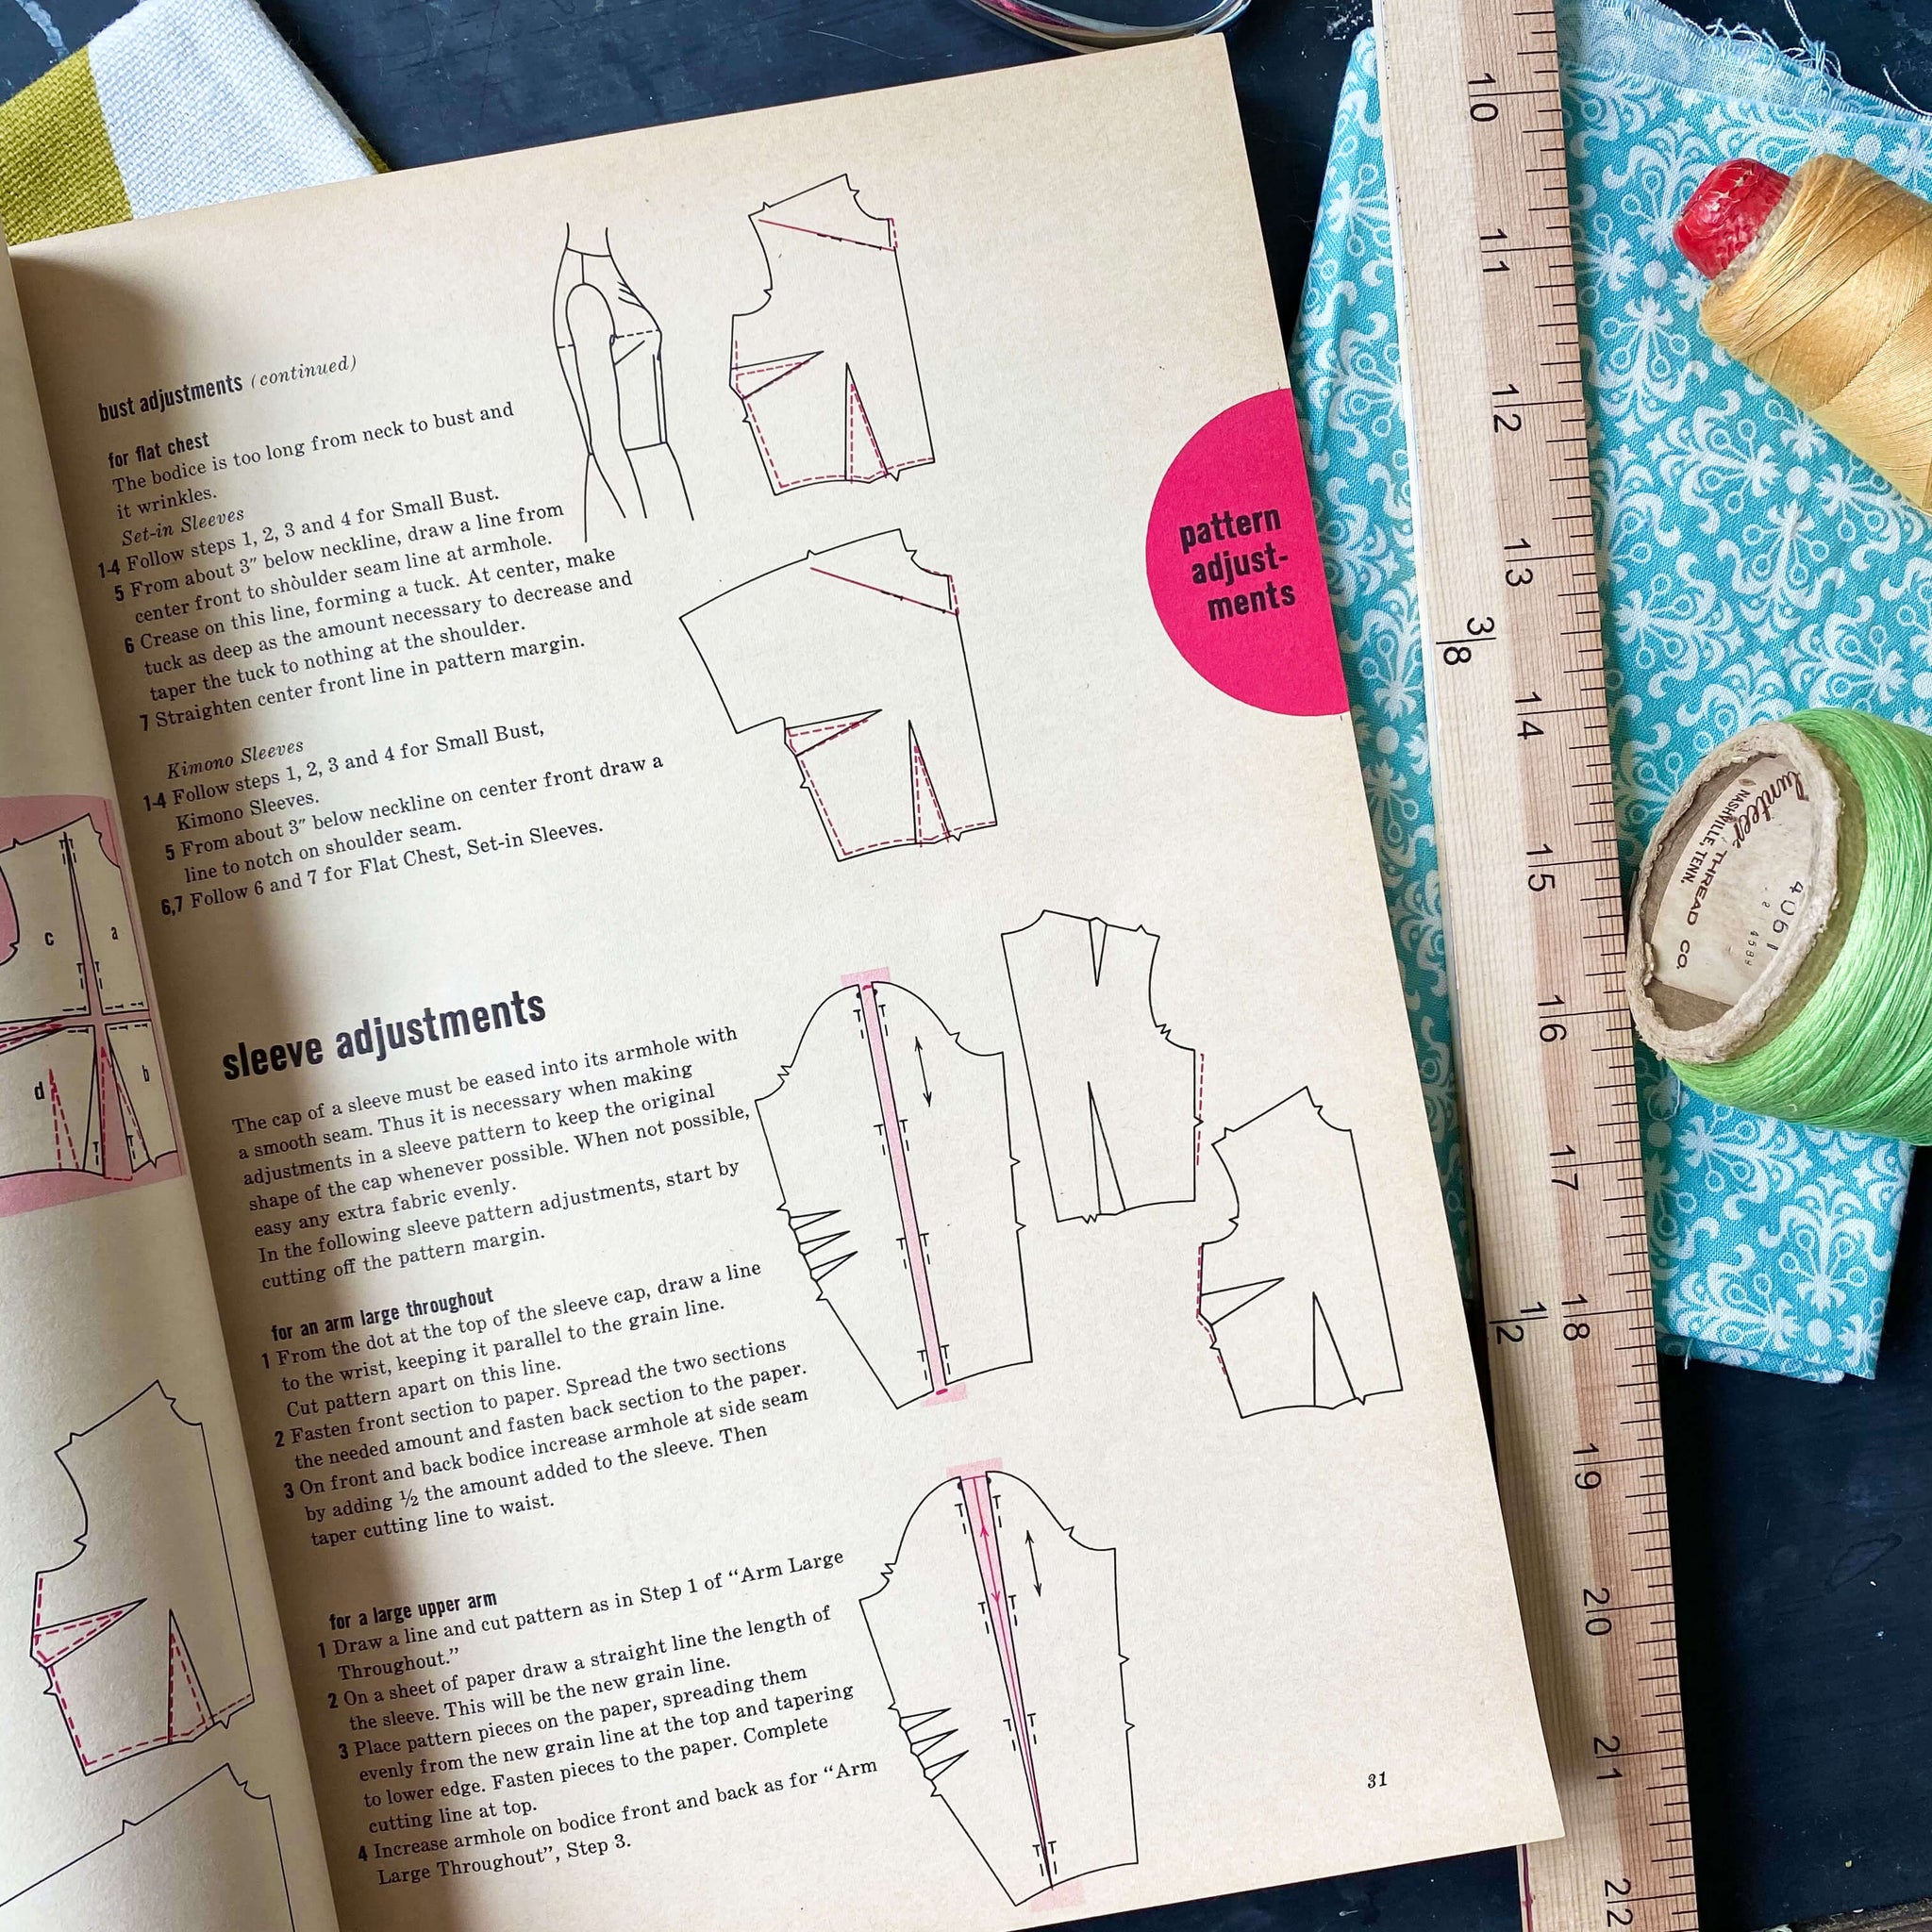 Simplicity Sewing Book - 1965 Edition - Instructional Guidebook for 19 – In  The Vintage Kitchen Shop